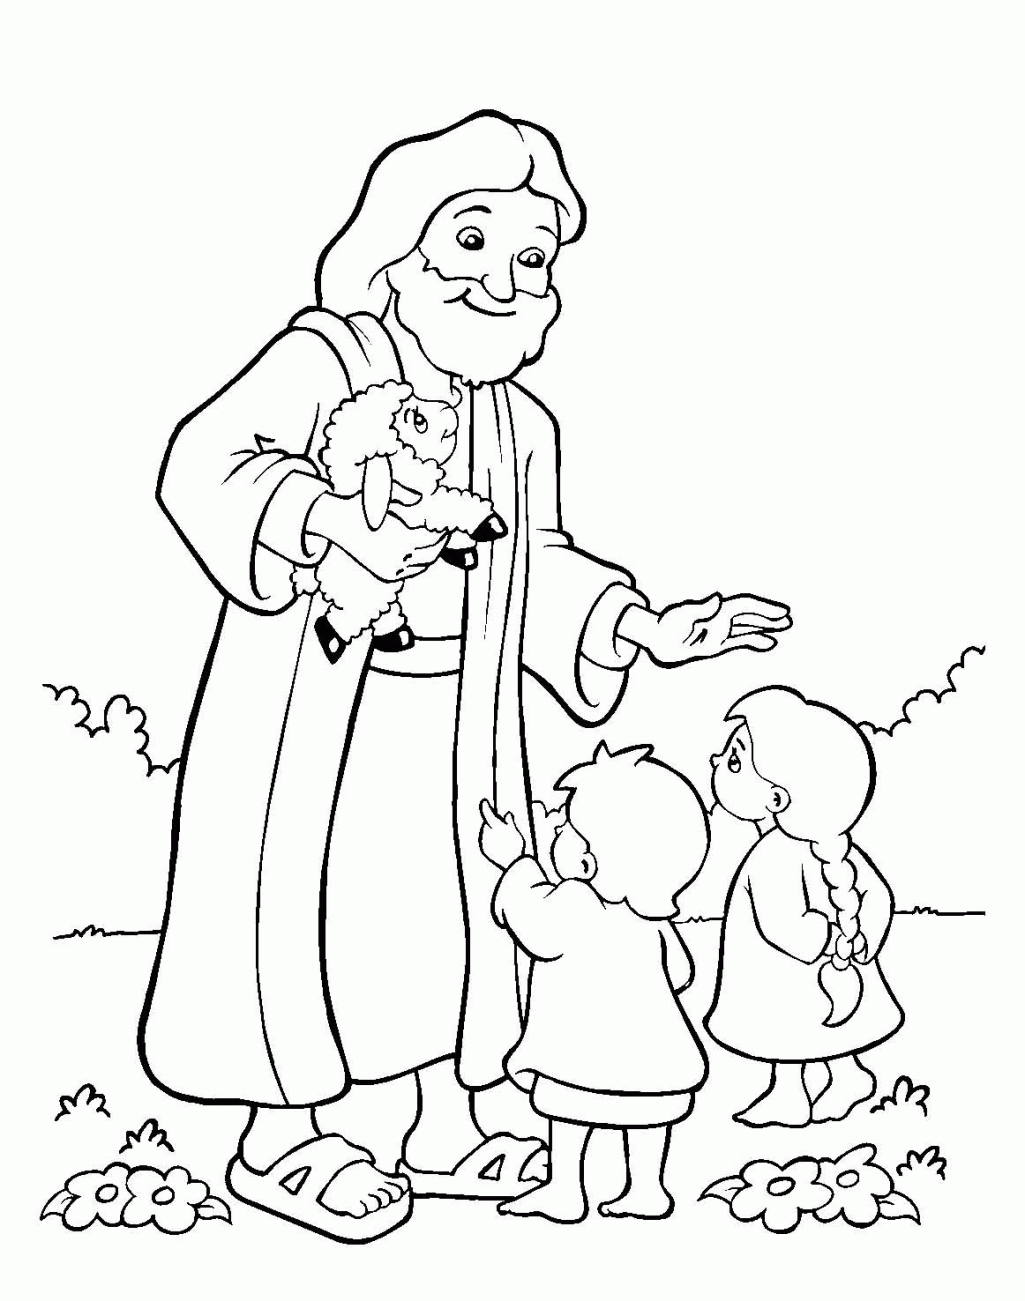 gospel-coloring-book-sunday-school-creation-bible-coloring-pages